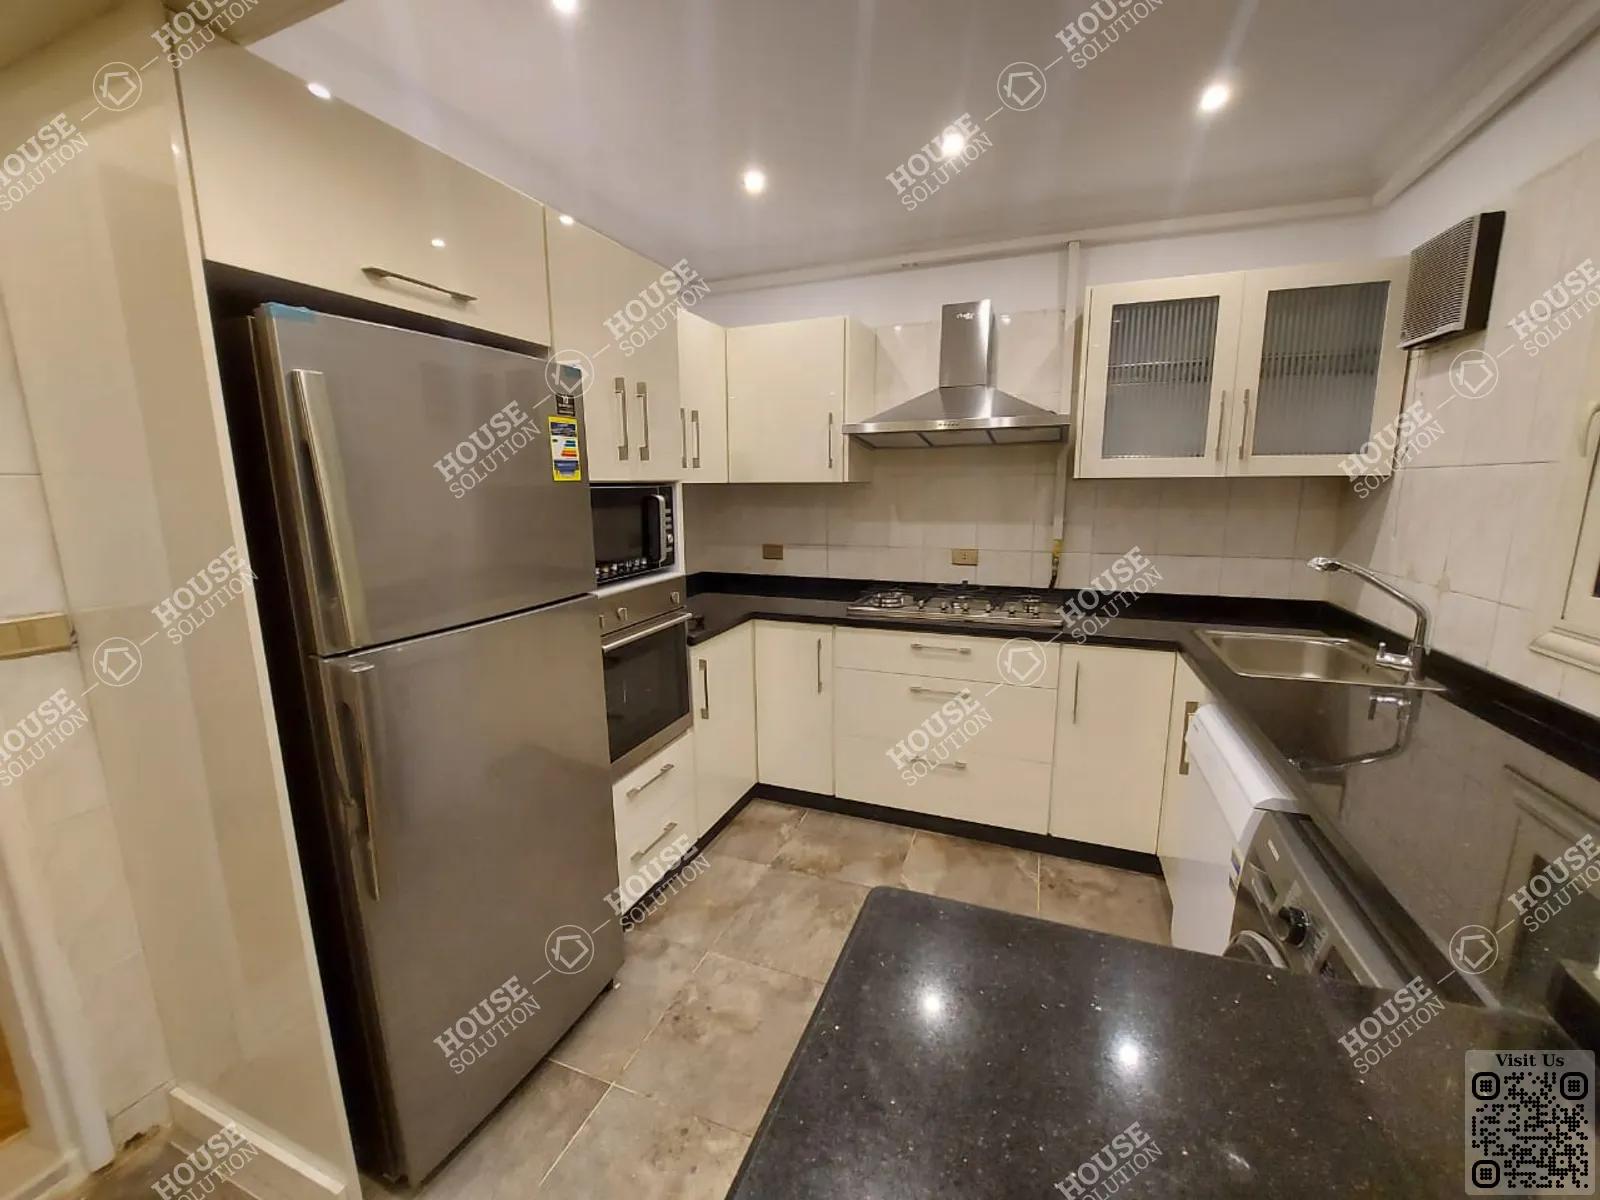 KITCHEN  @ Apartments For Rent In Maadi Maadi Degla Area: 100 m² consists of 2 Bedrooms 1 Bathrooms Modern furnished 5 stars #4730-1